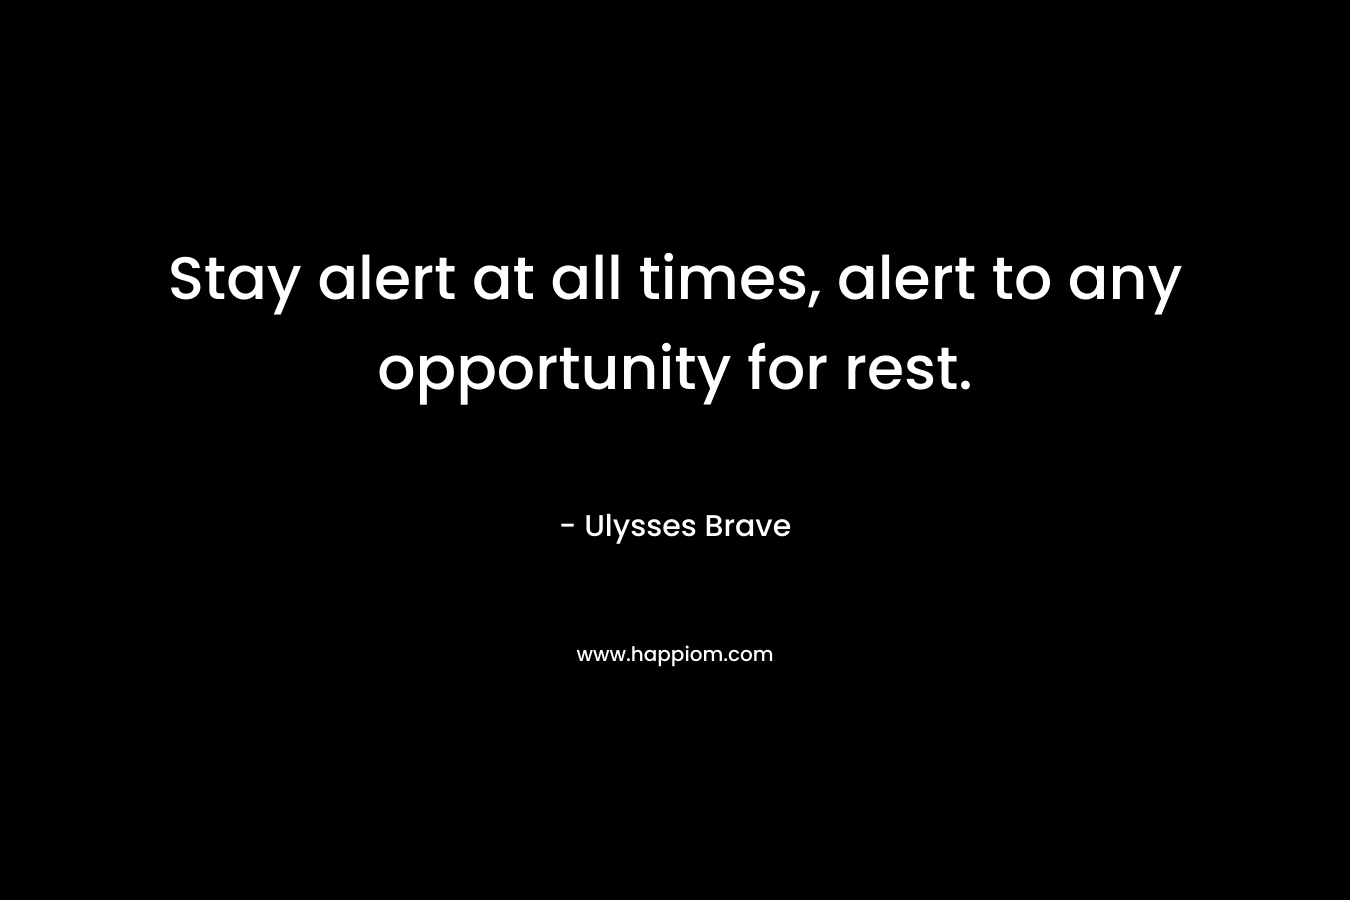 Stay alert at all times, alert to any opportunity for rest. – Ulysses Brave